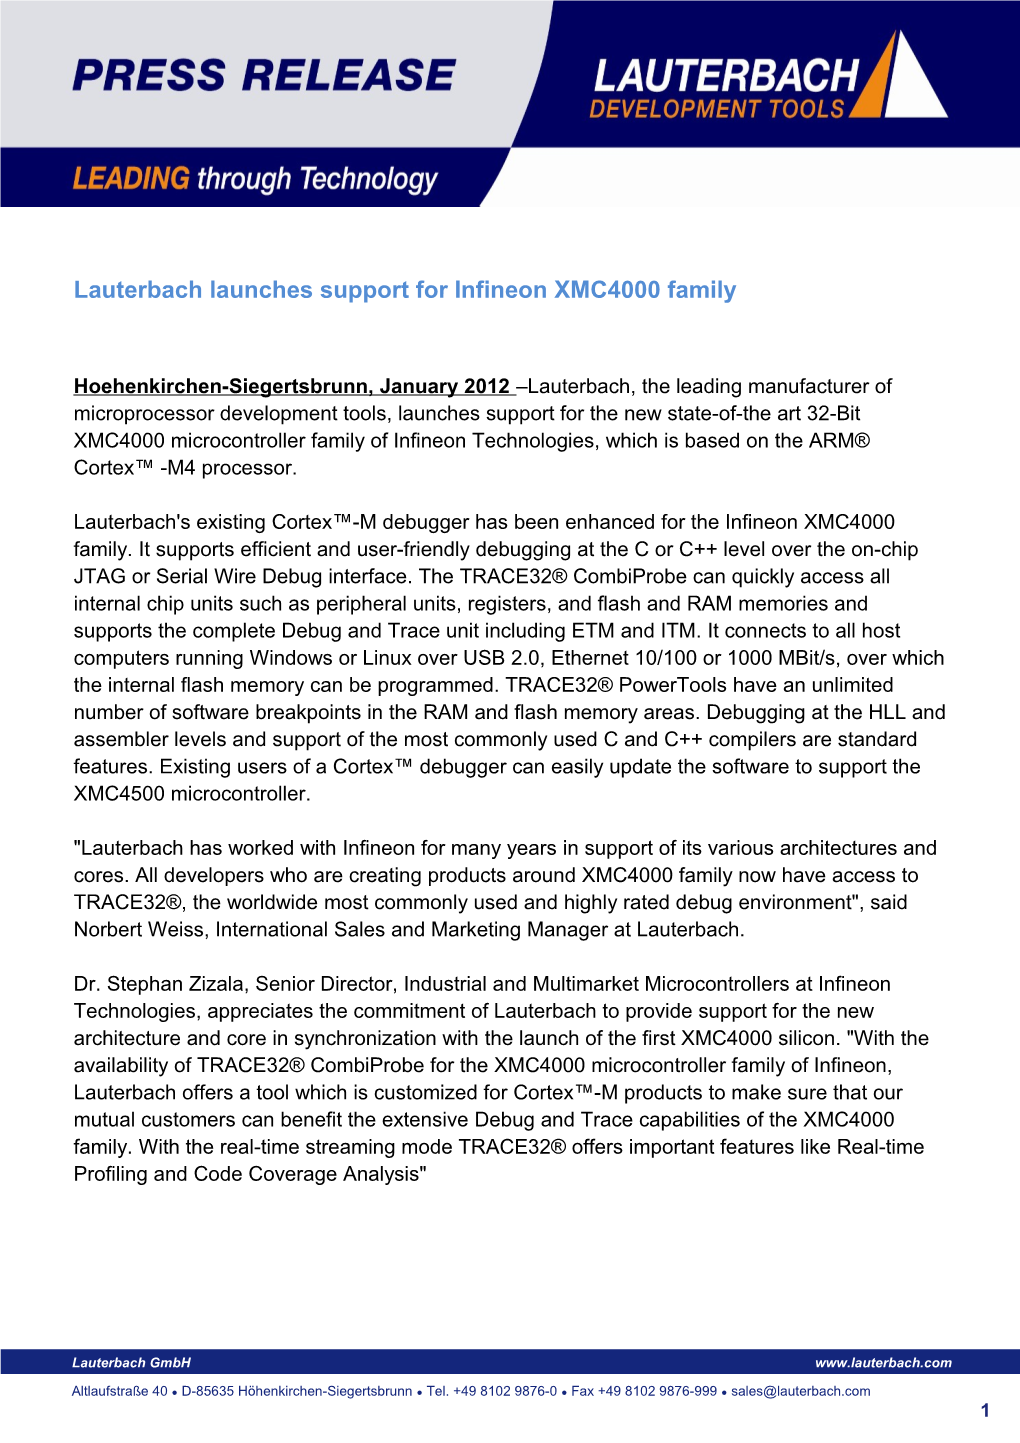 Lauterbach Launches Support for Infineon XMC4000 Family